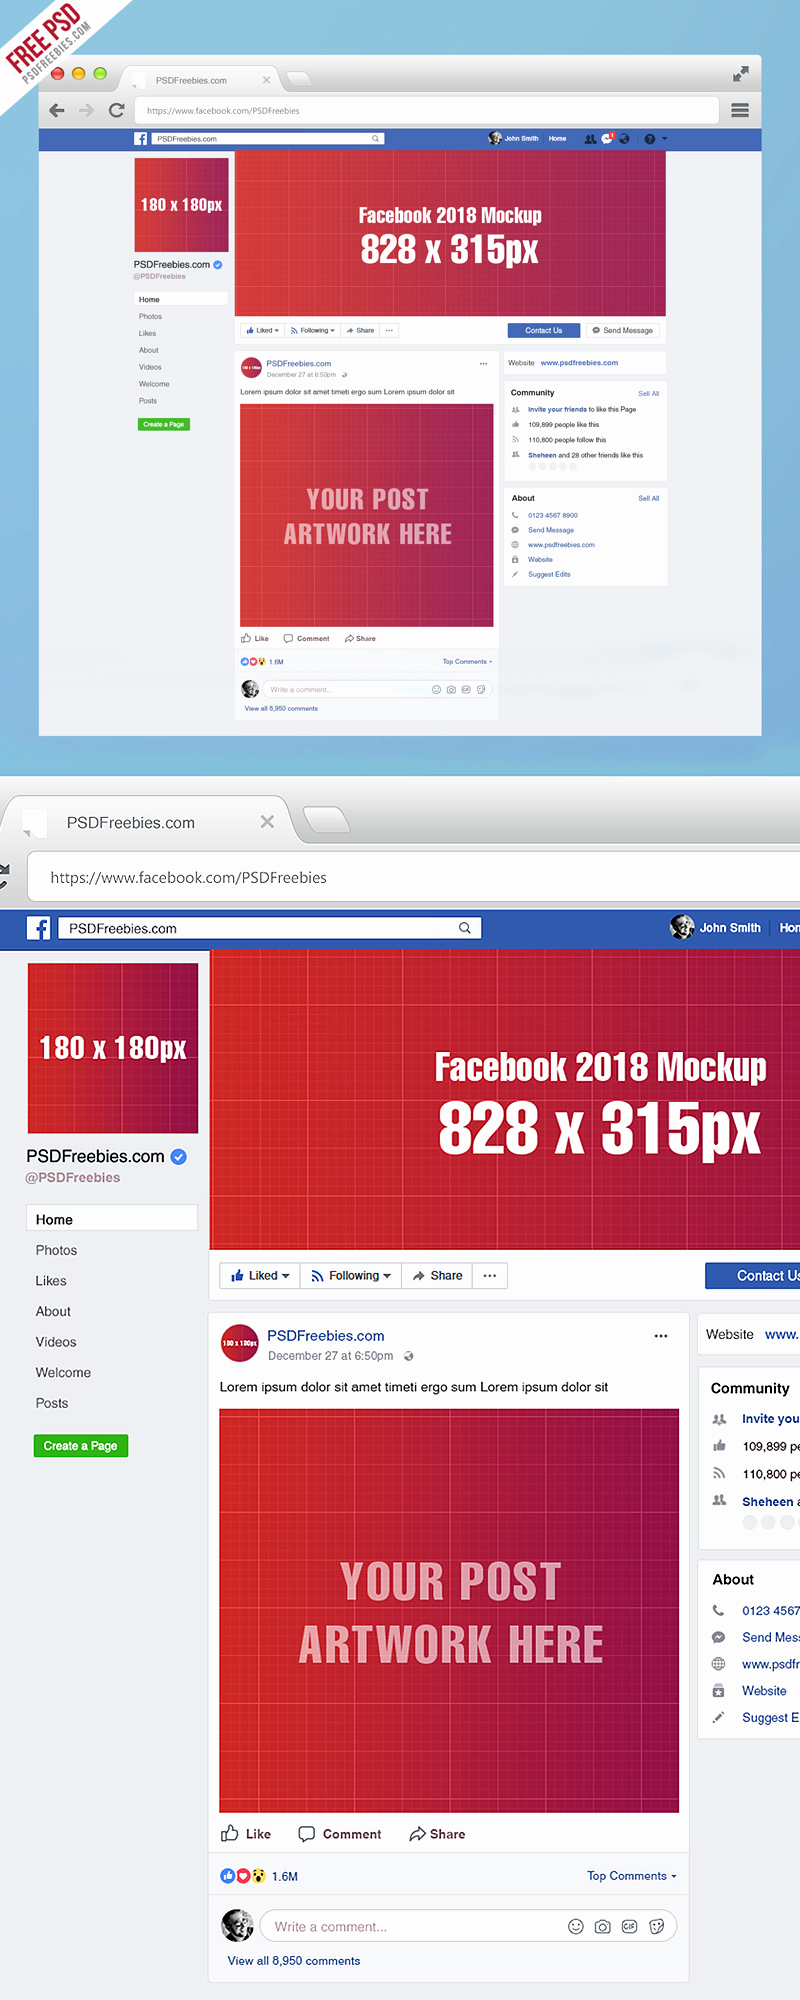 Facebook Business Page Template Awesome Page Mockup 2018 Template Psd On Behance